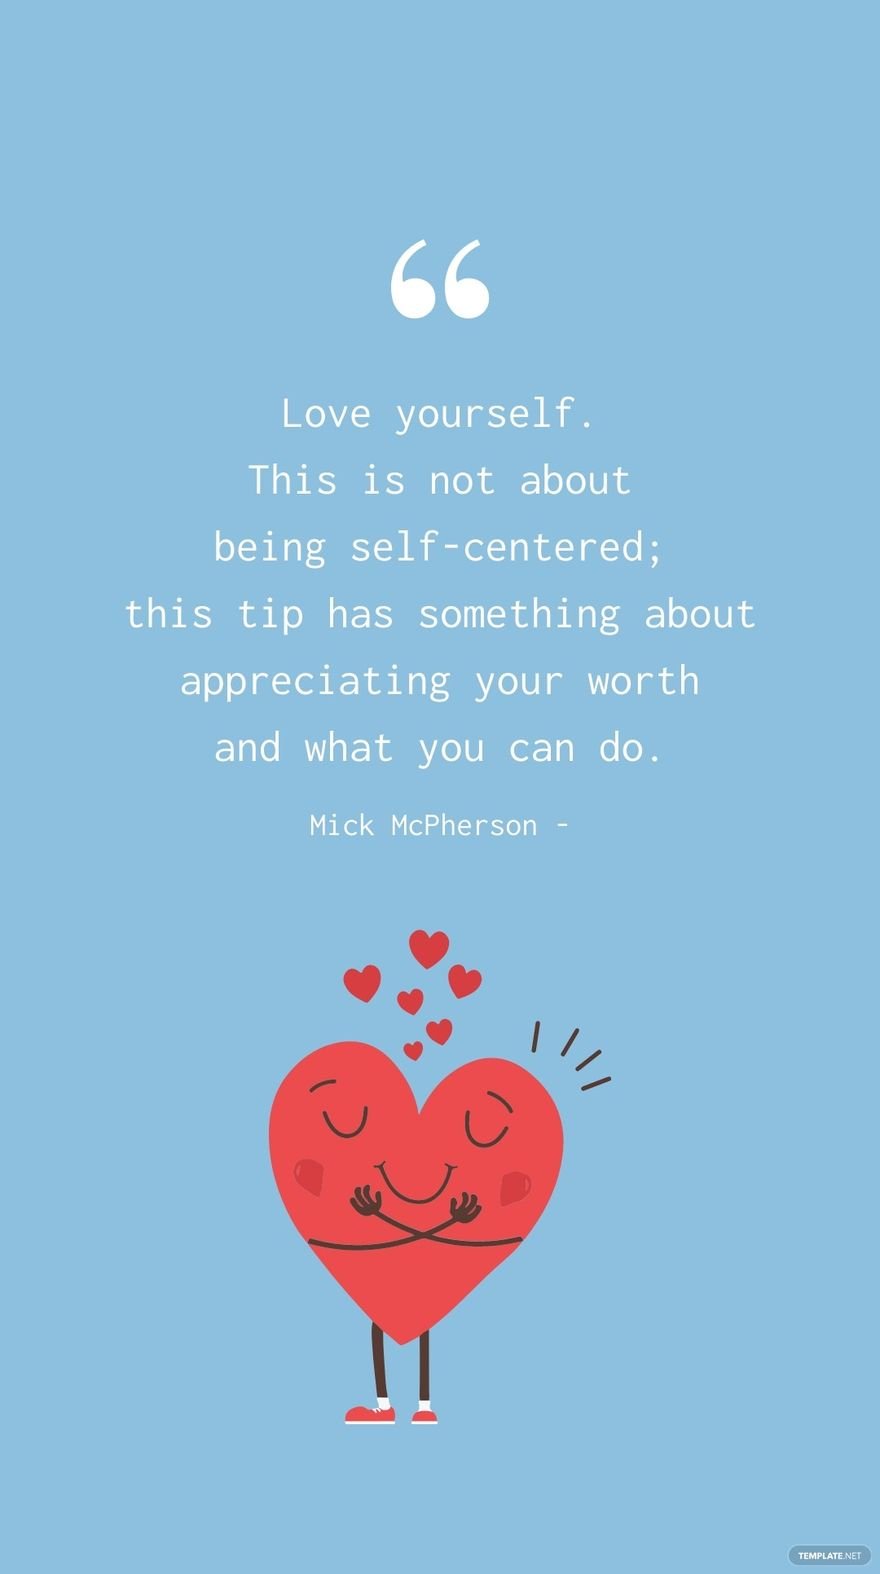 Free Mick McPherson - Love yourself. This is not about being self-centered; this tip has something about appreciating your worth and what you can do.